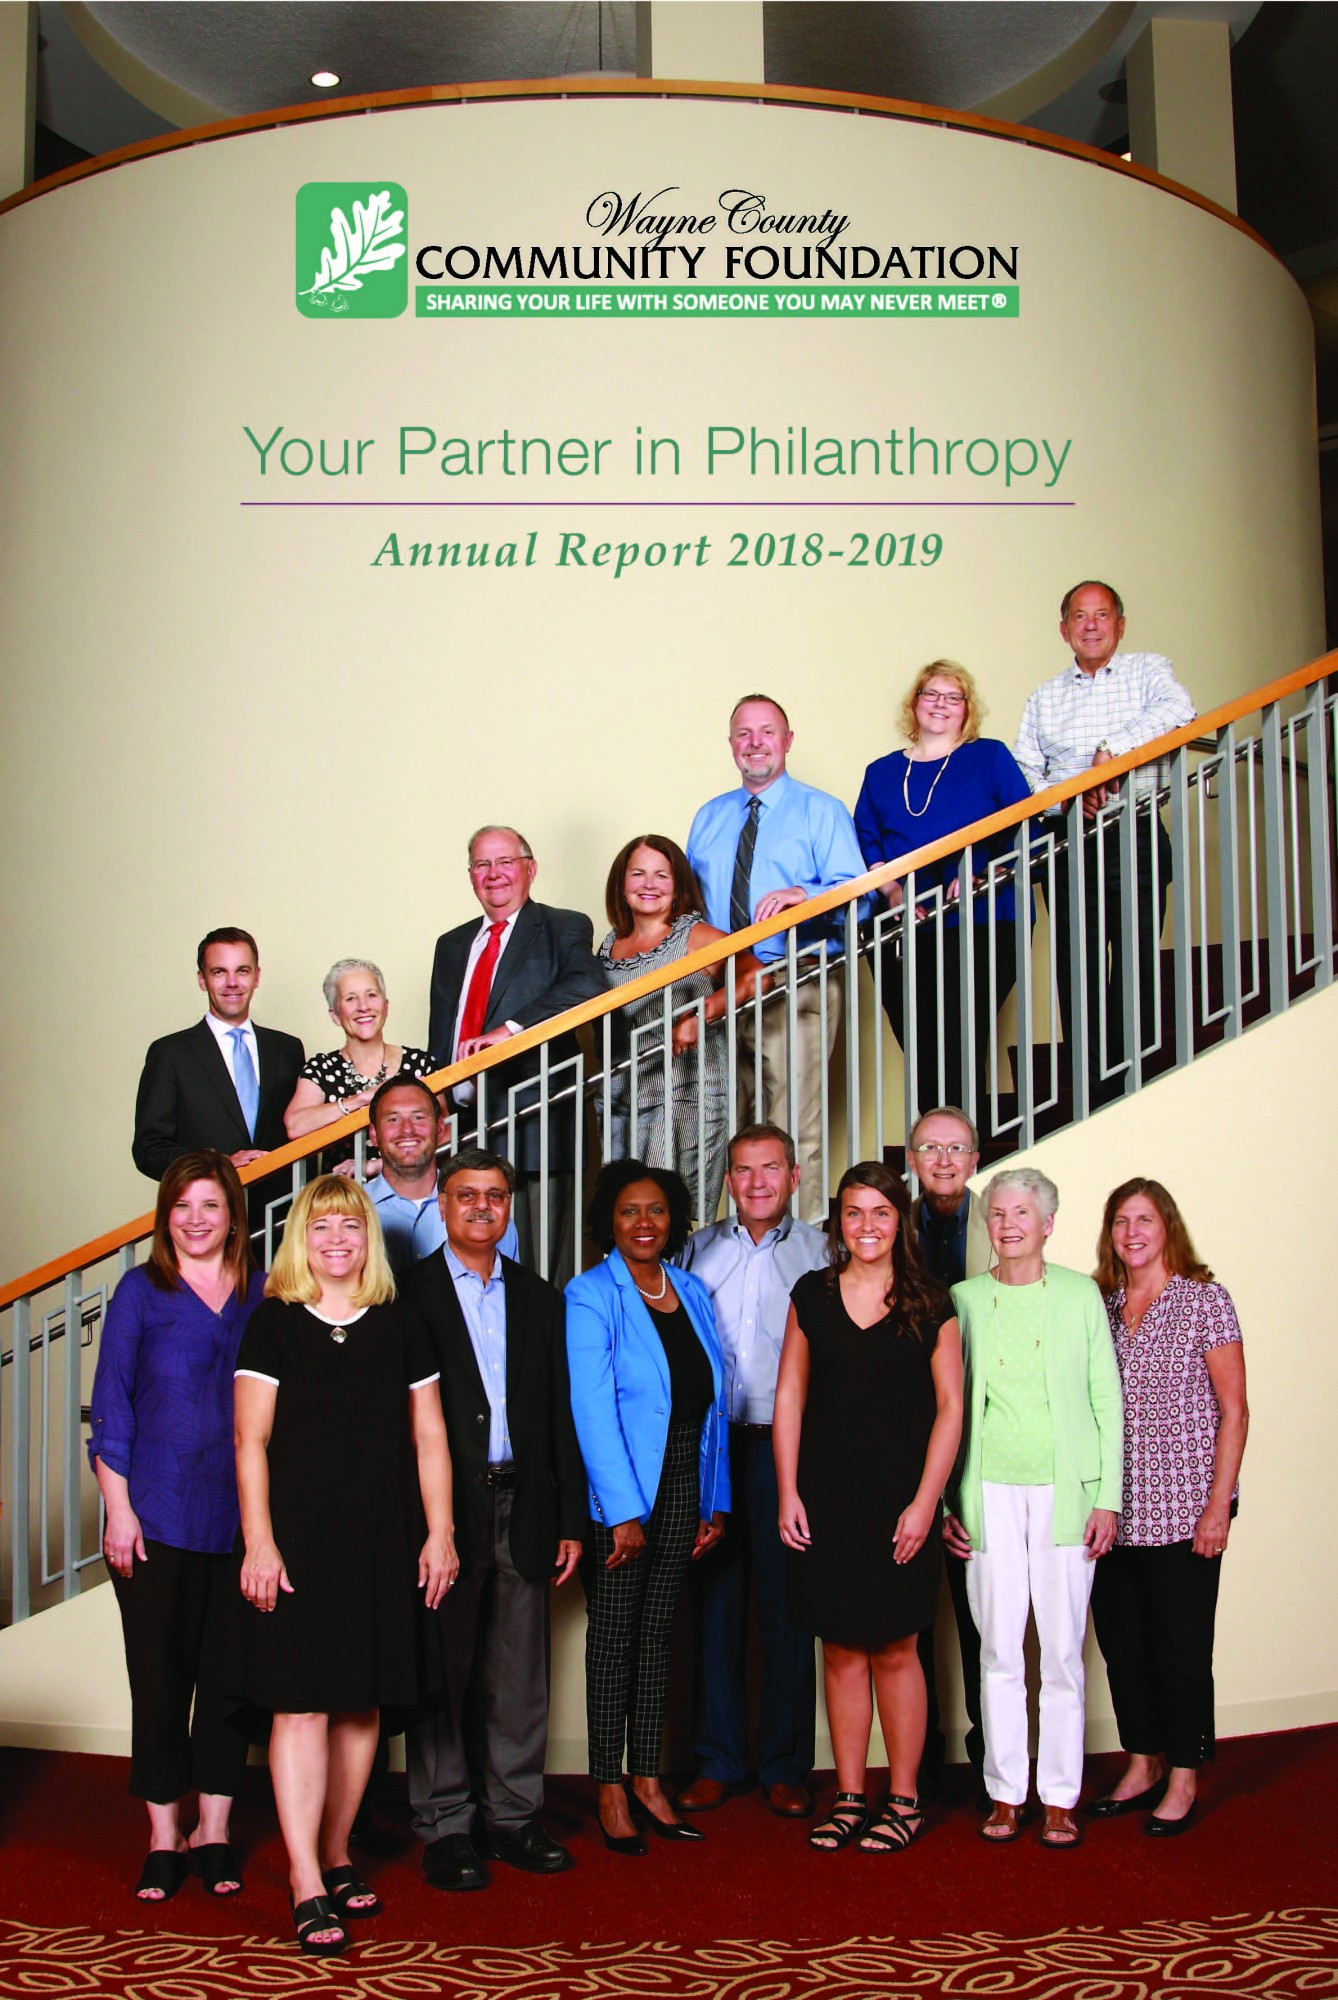 WCCF Annual Report 2018-2019